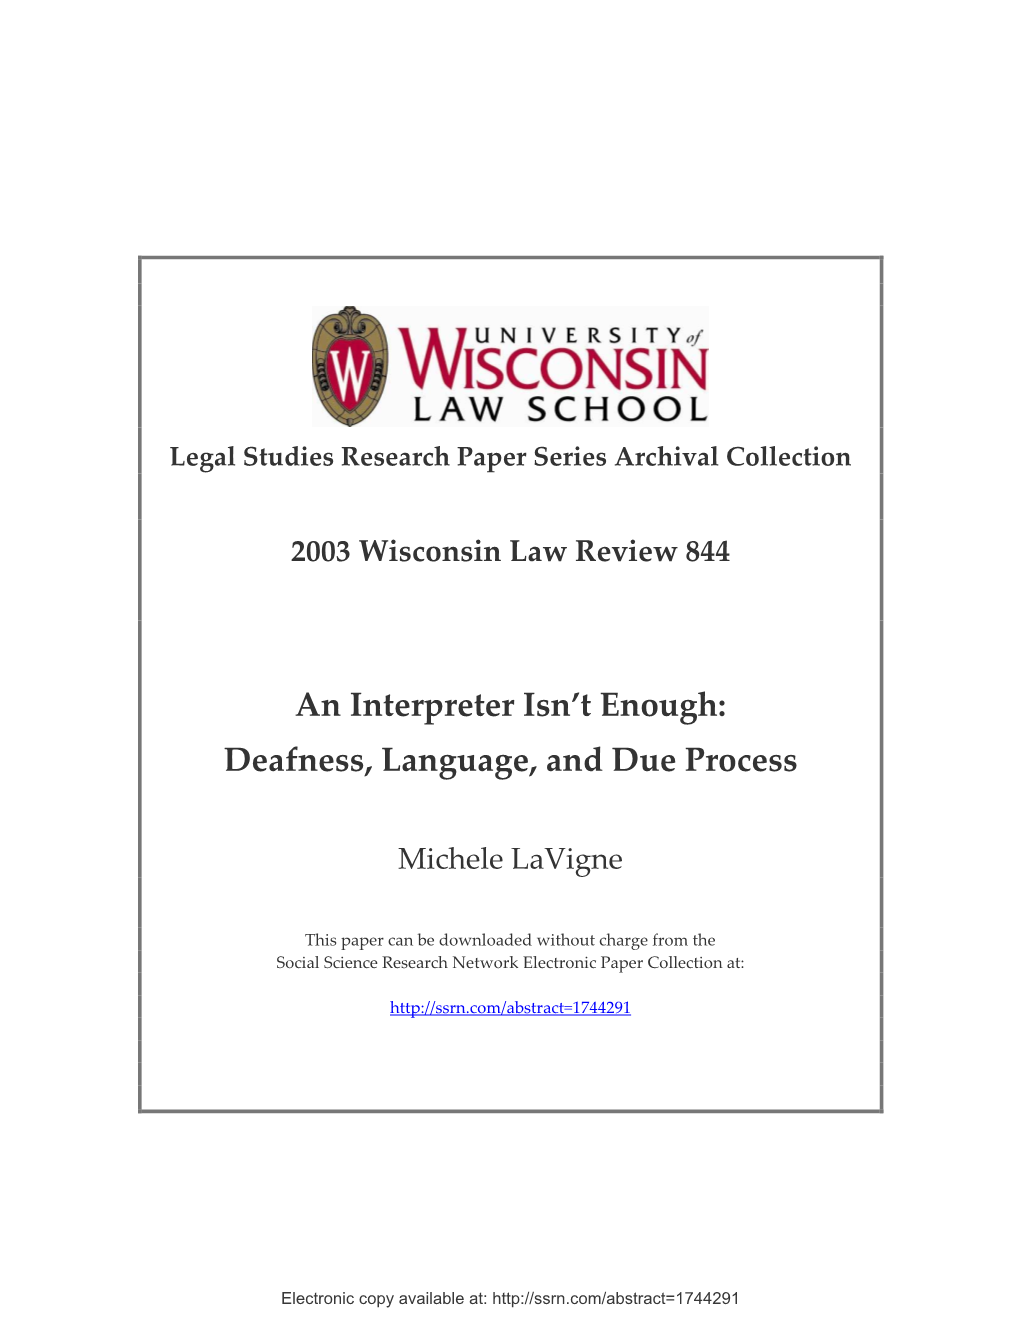 An Interpreter Isn't Enough: Deafness, Language, and Due Process